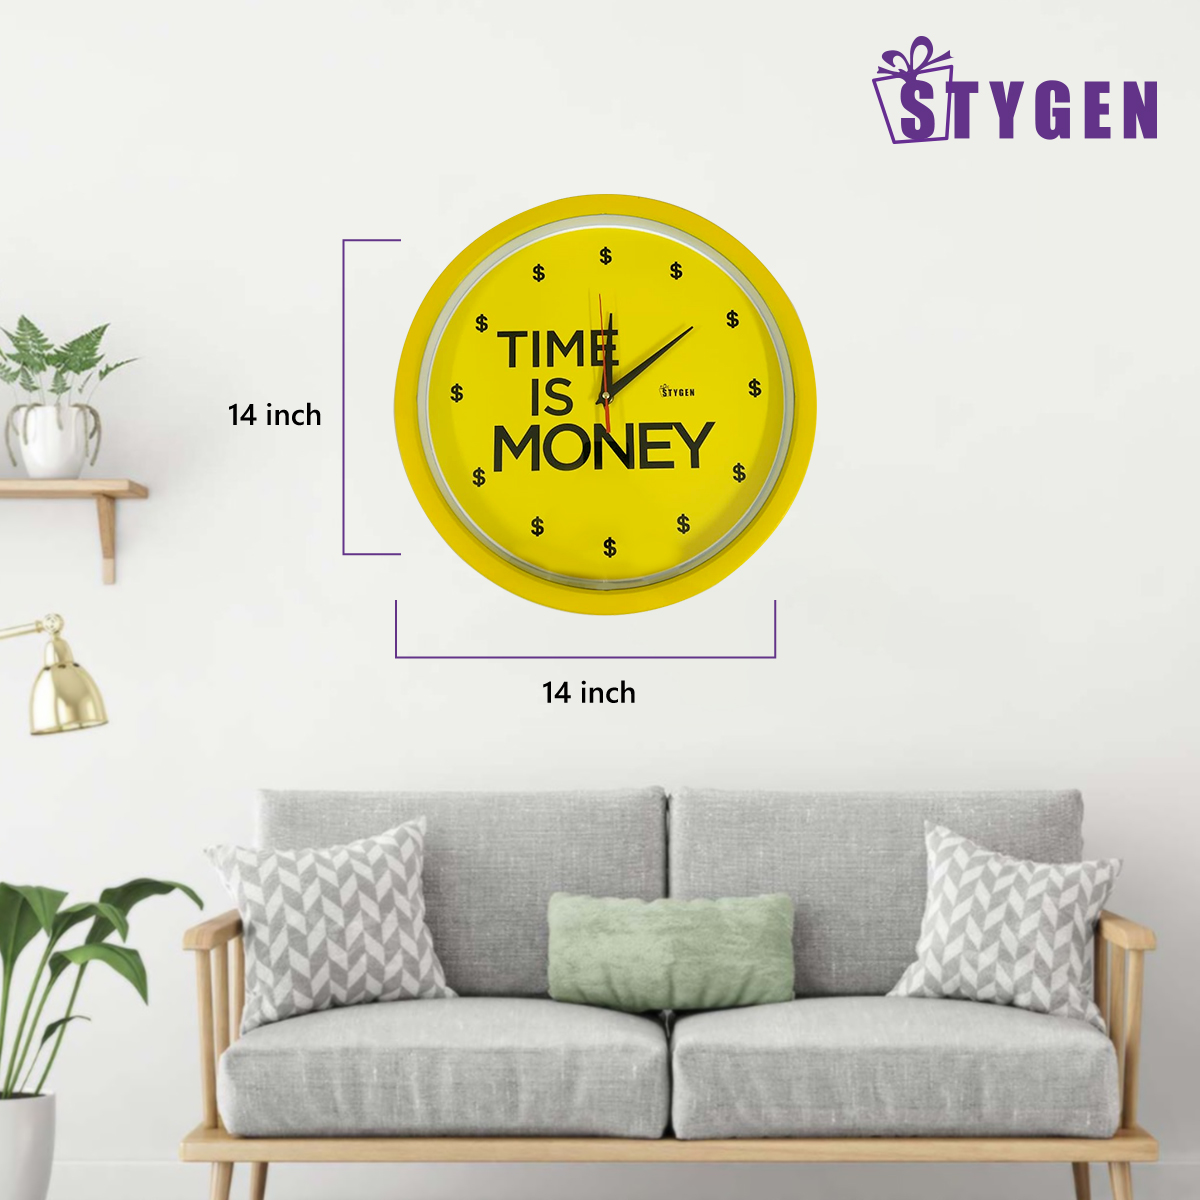 Decorative Wall Clock - Time is Money